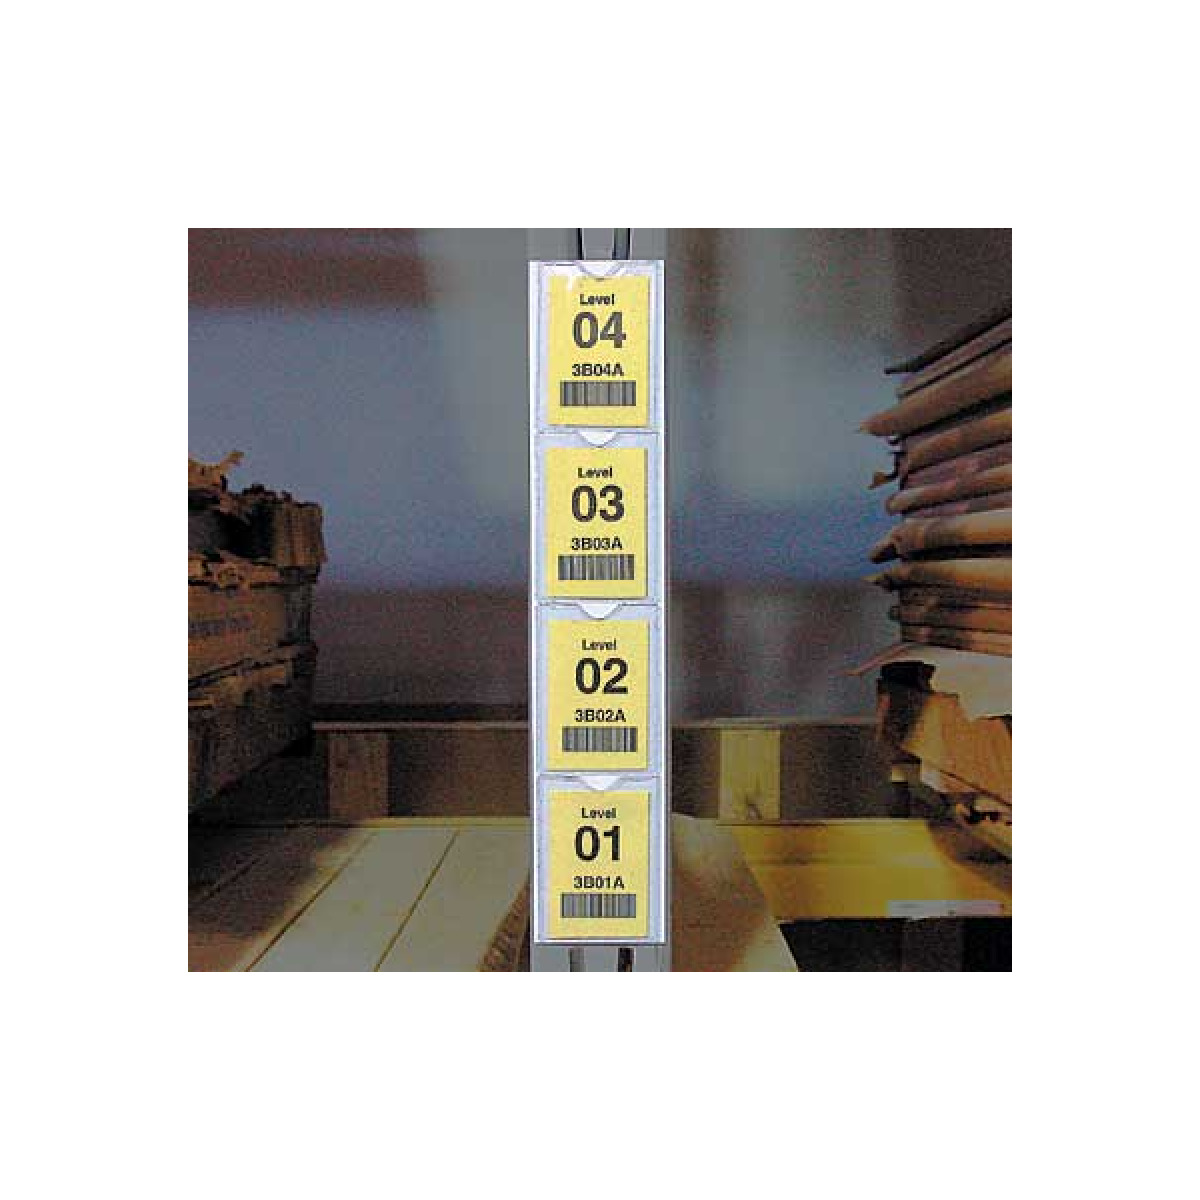 Man-Down - Vertical Card Holder for barcoding in warehouses